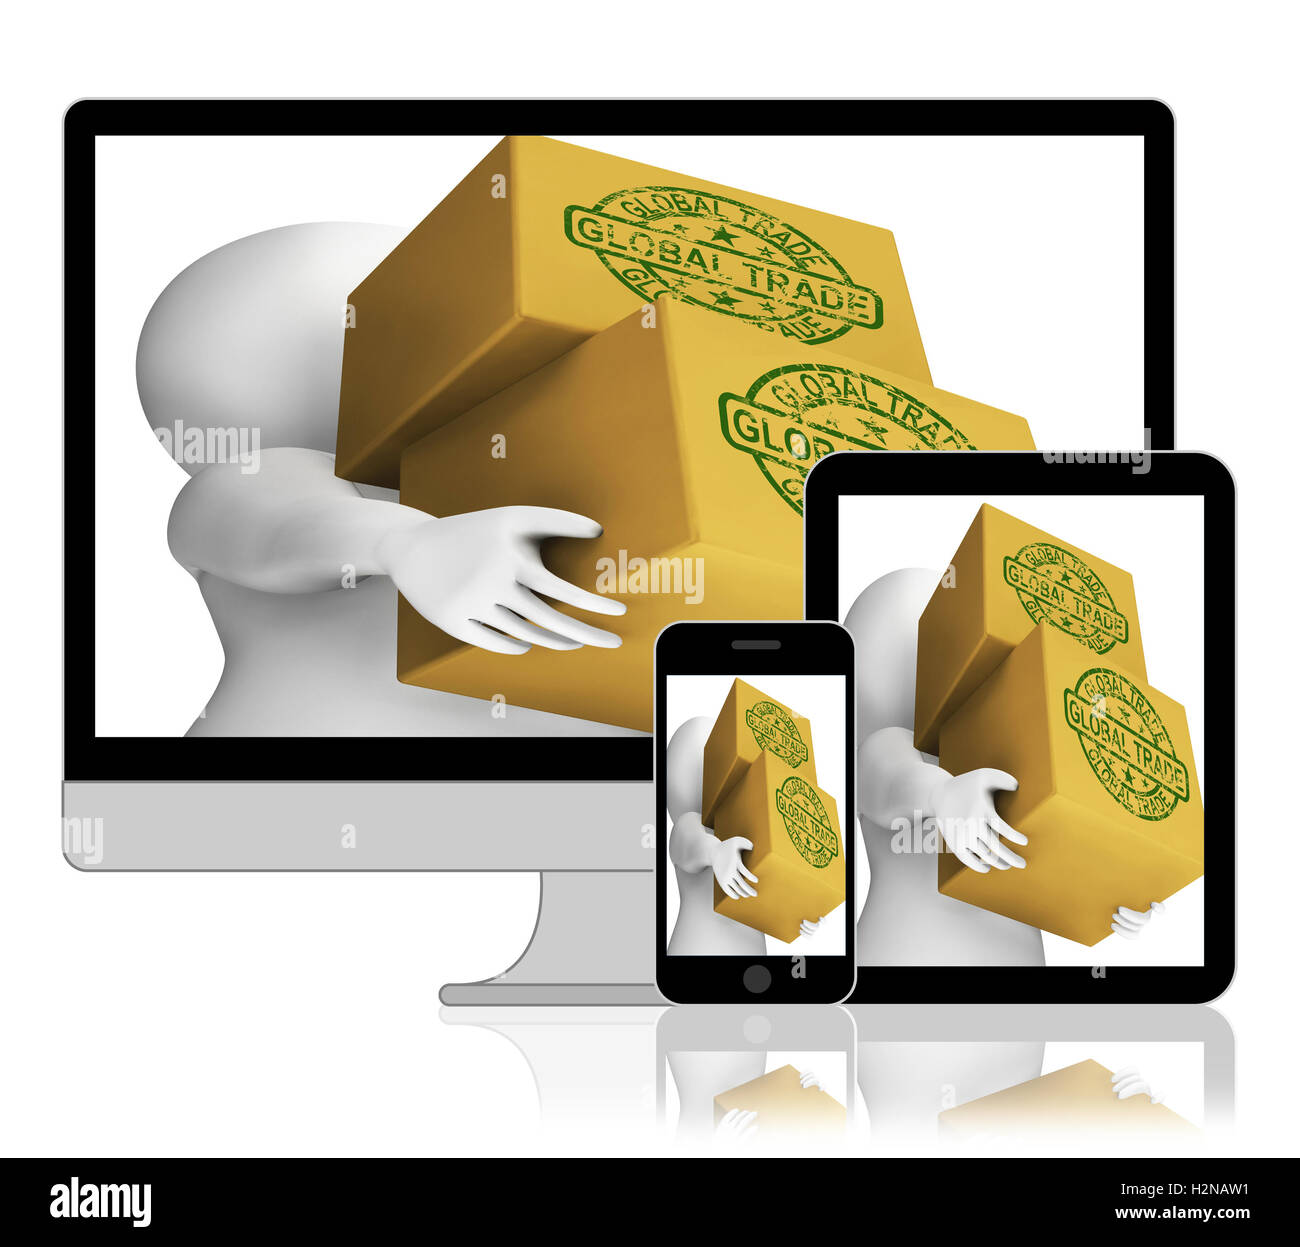 Global Trade Boxes Displaying International Buying And Selling Stock Photo